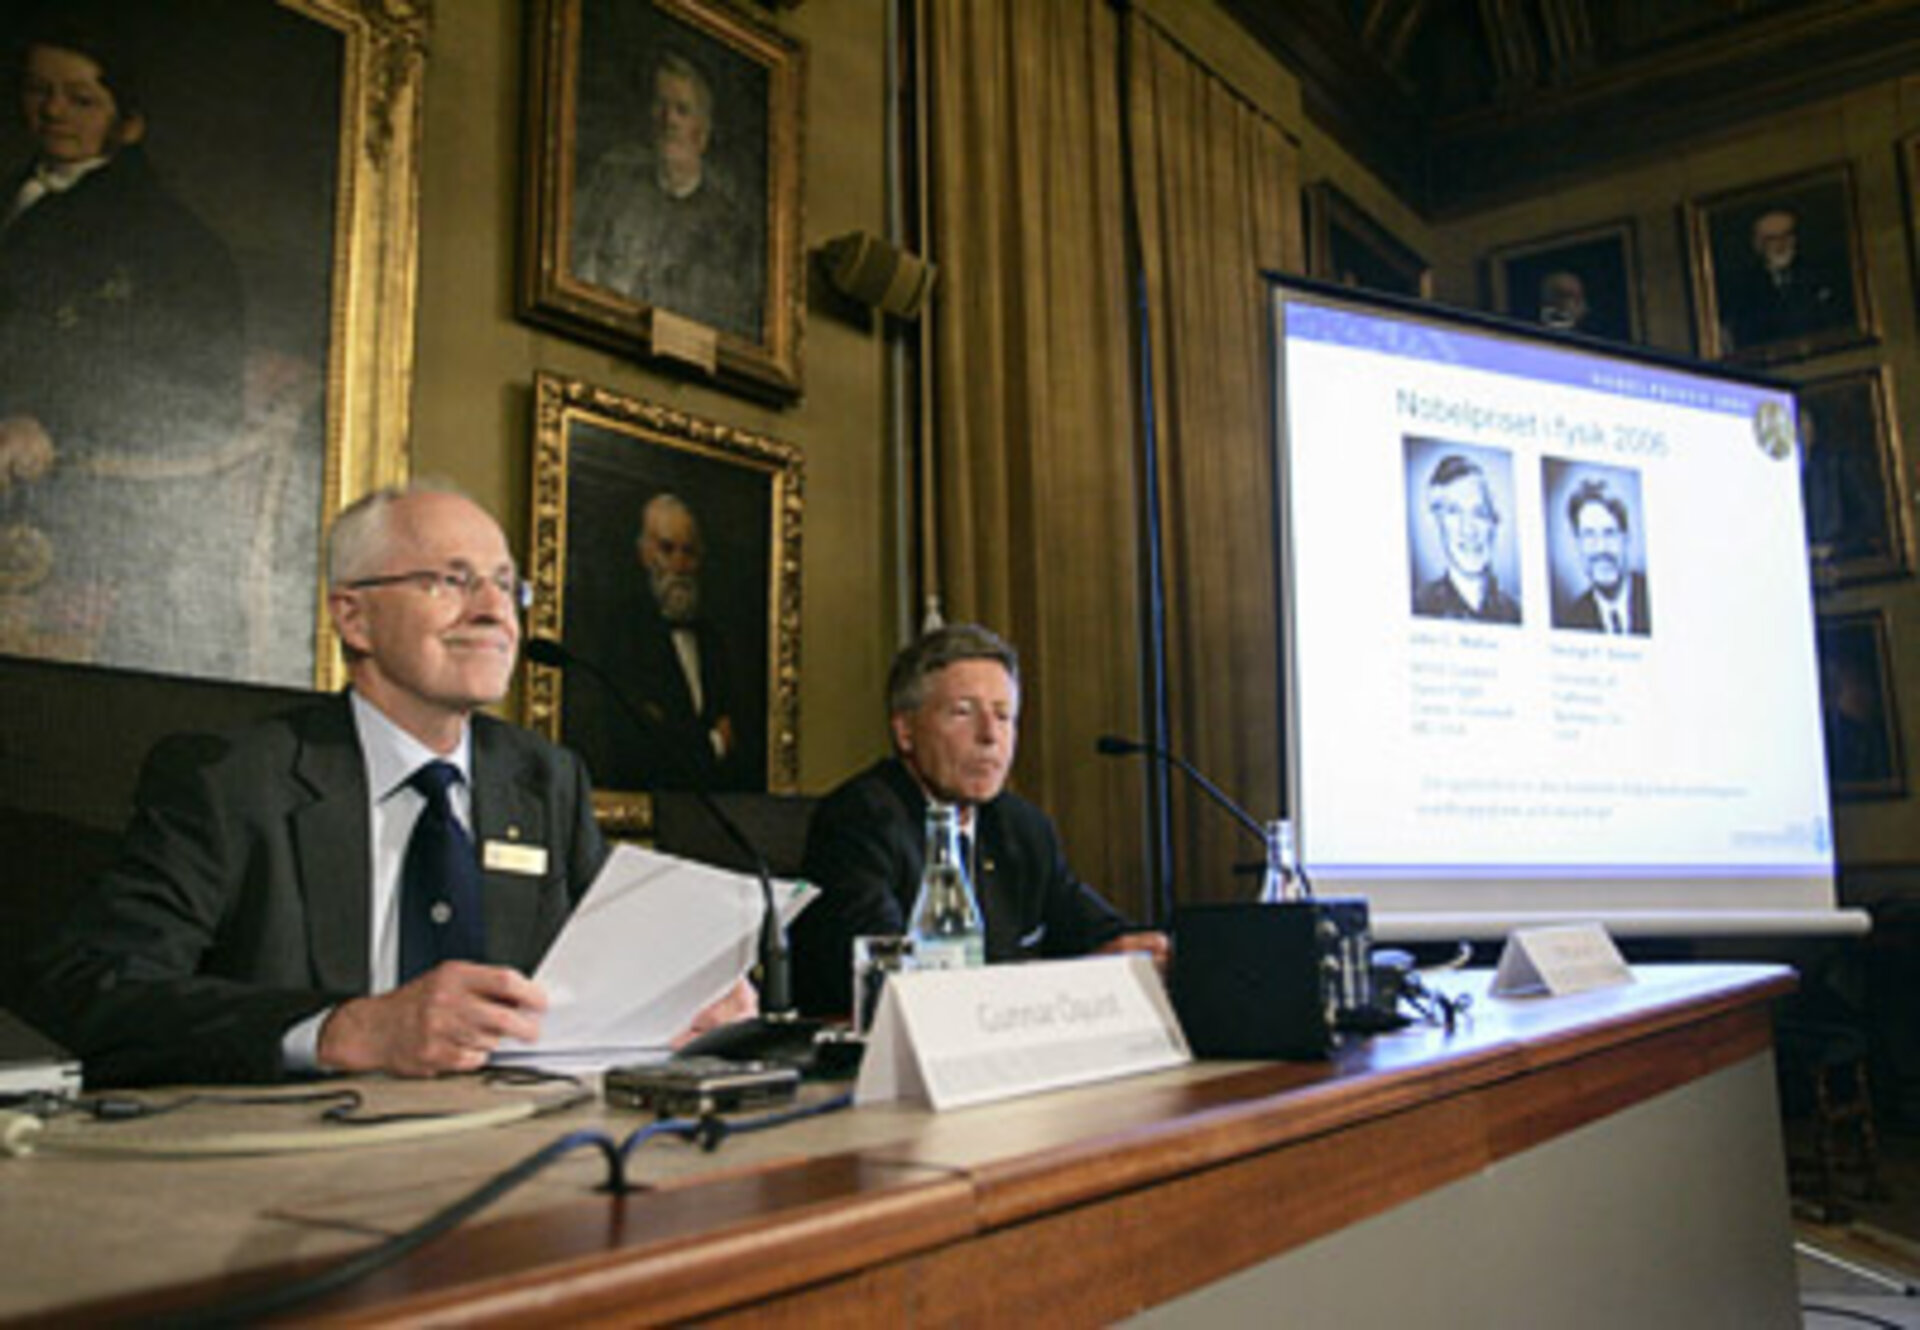 Announcement of  the 2006 Nobel prize for Physics